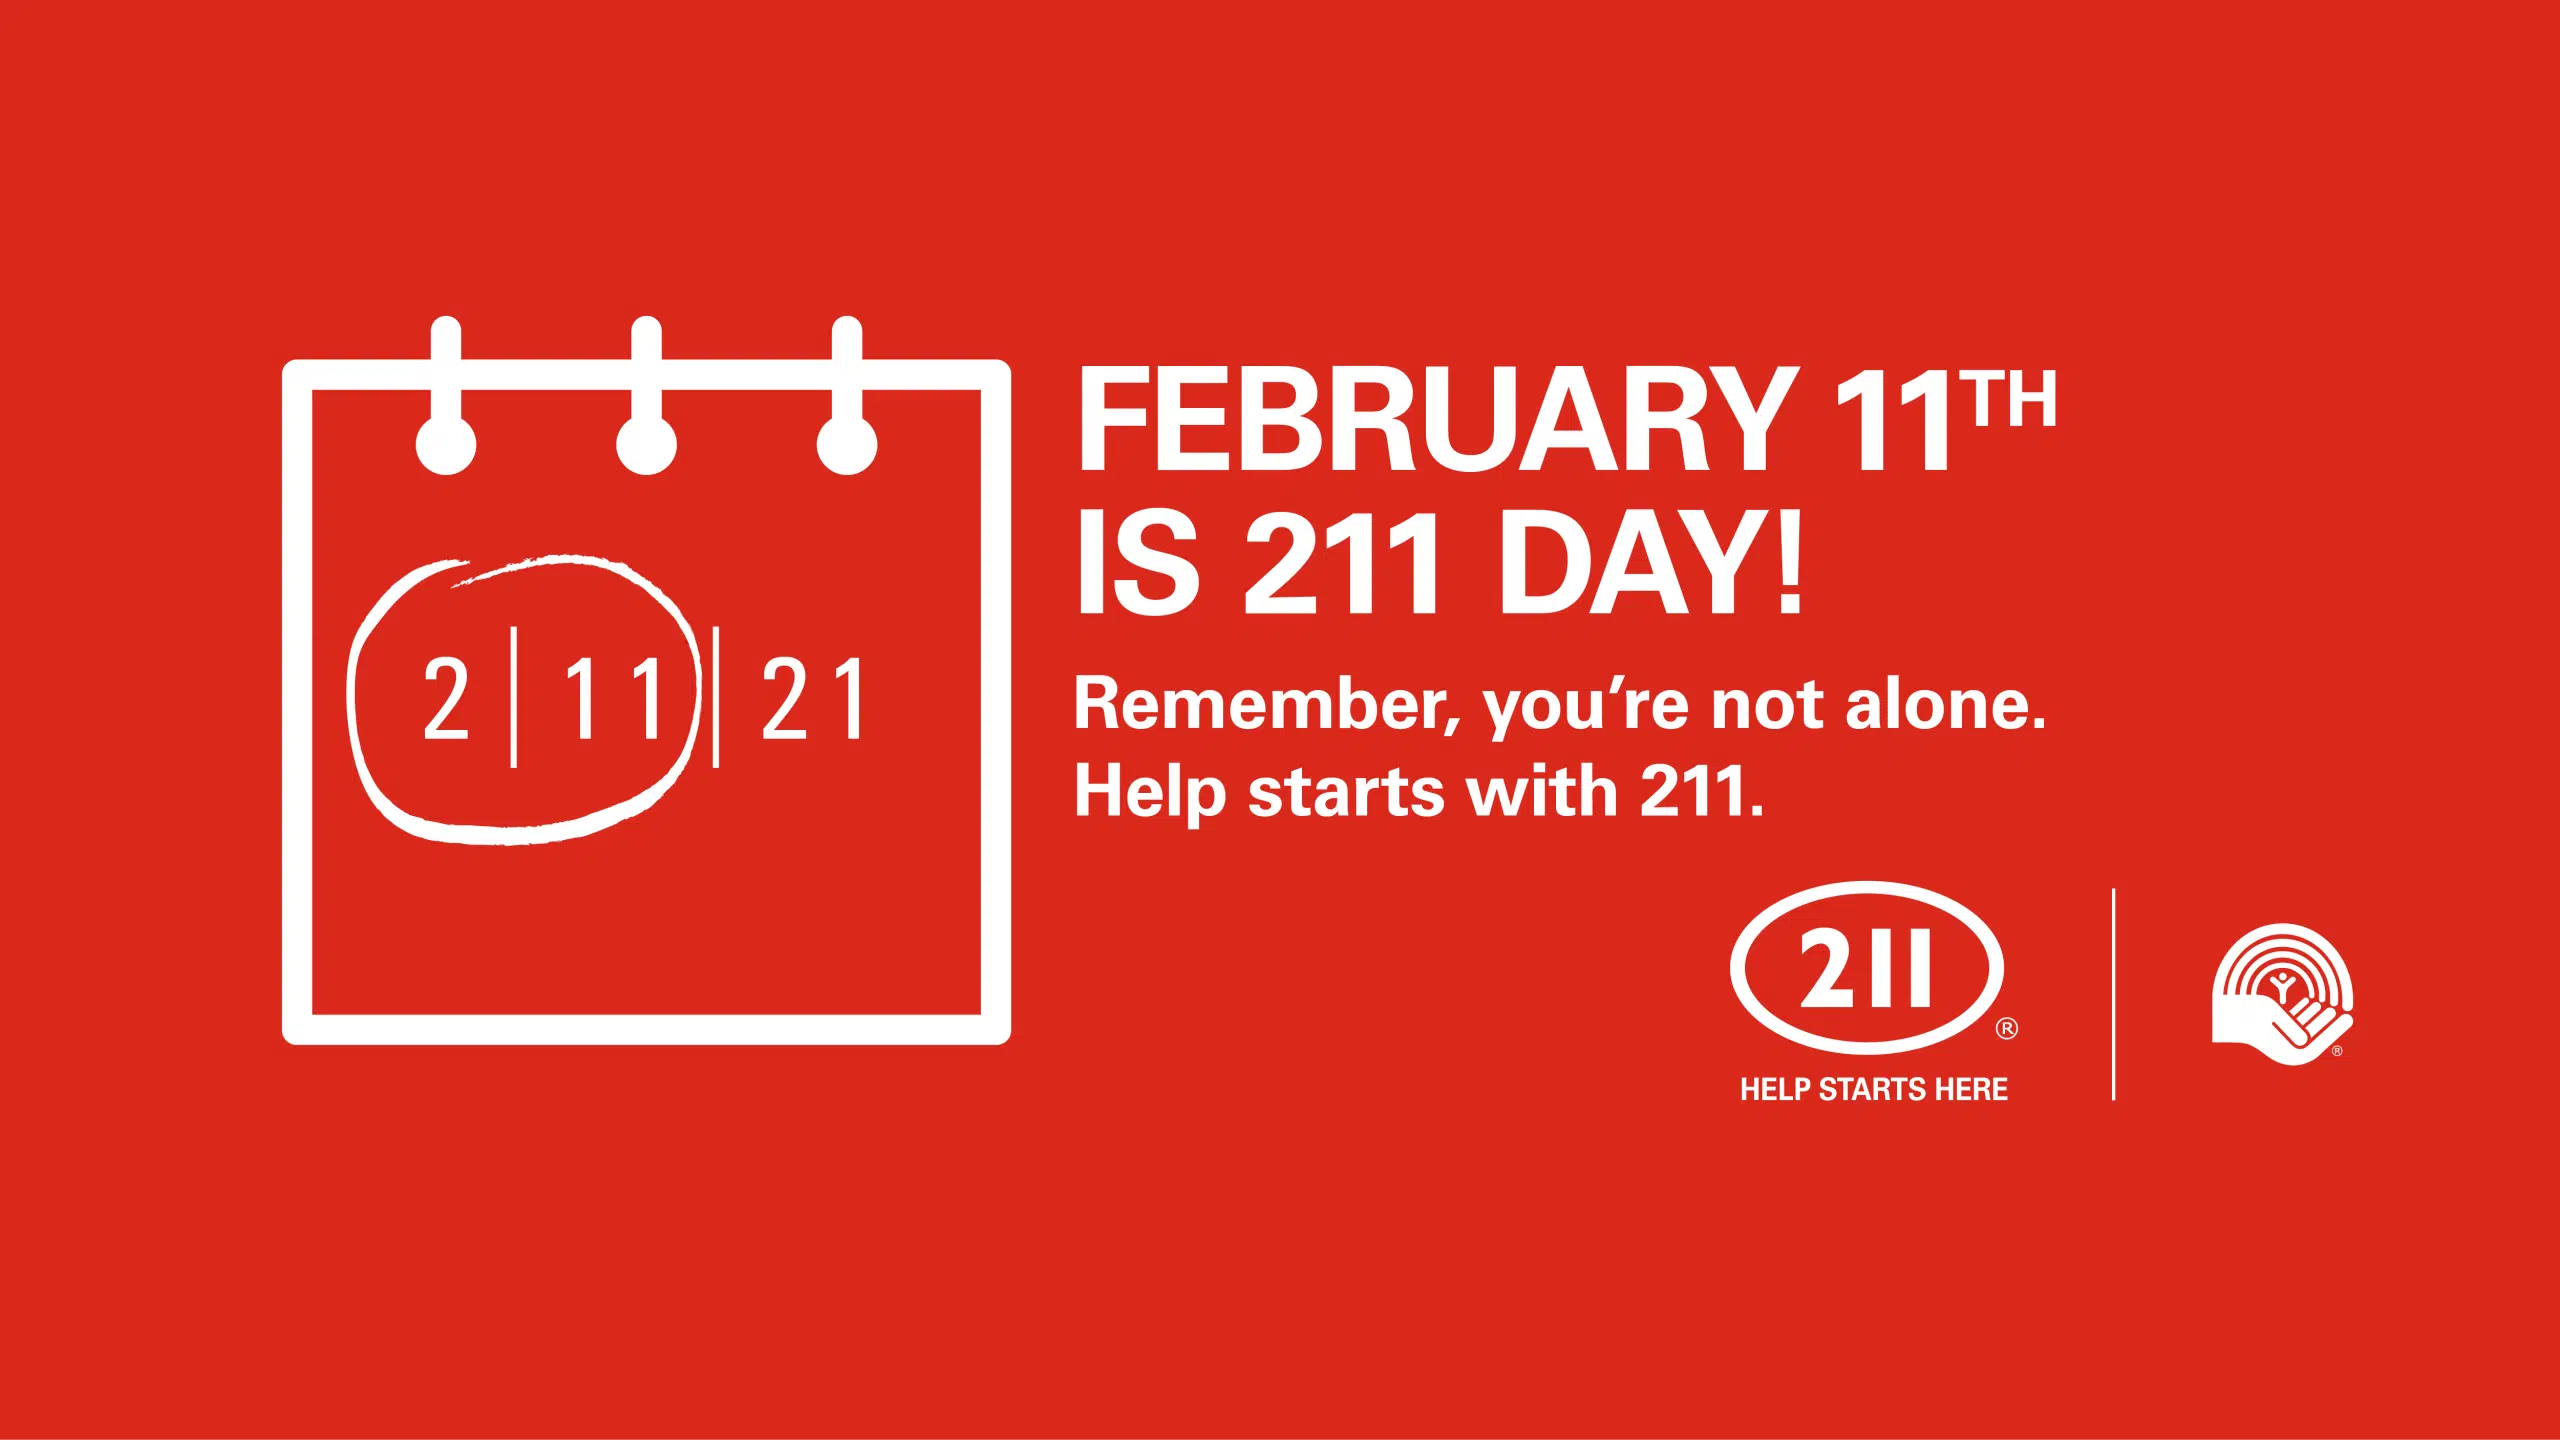 February 11th or 2/11 is 211 Day